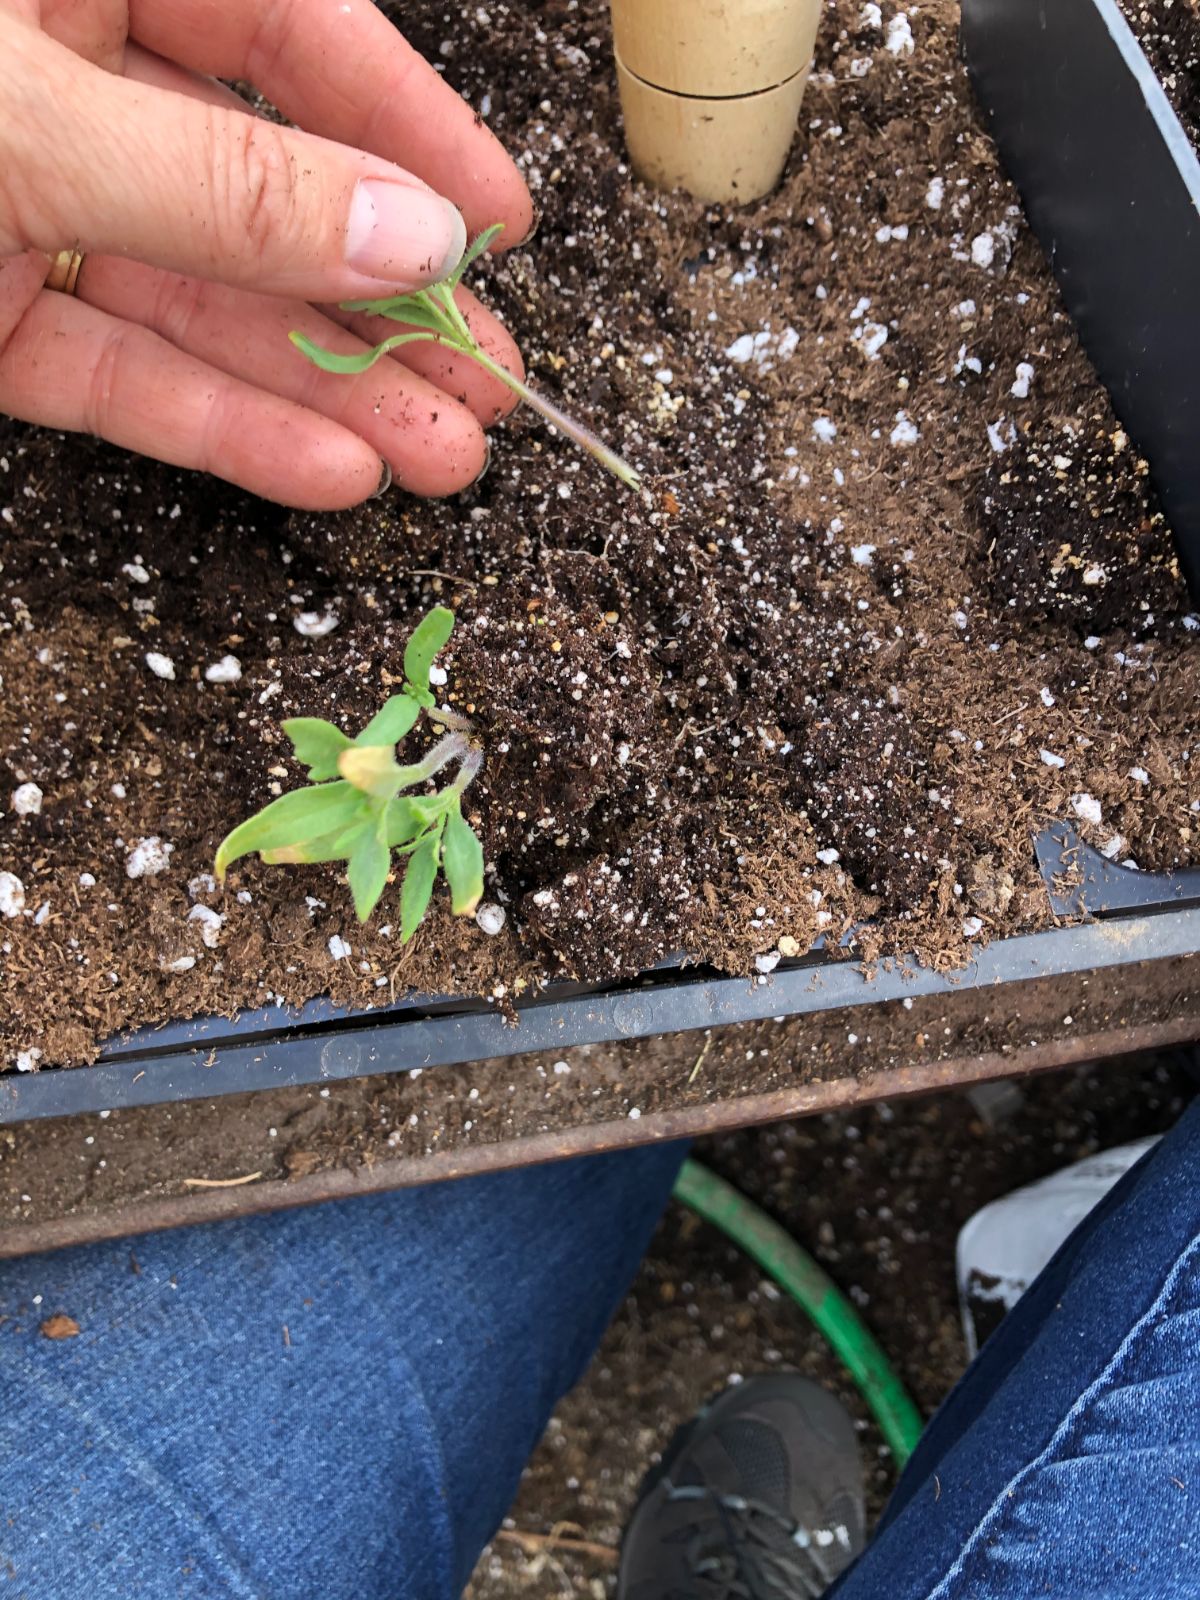 The strongest point of attachment in a seedling is its leaves